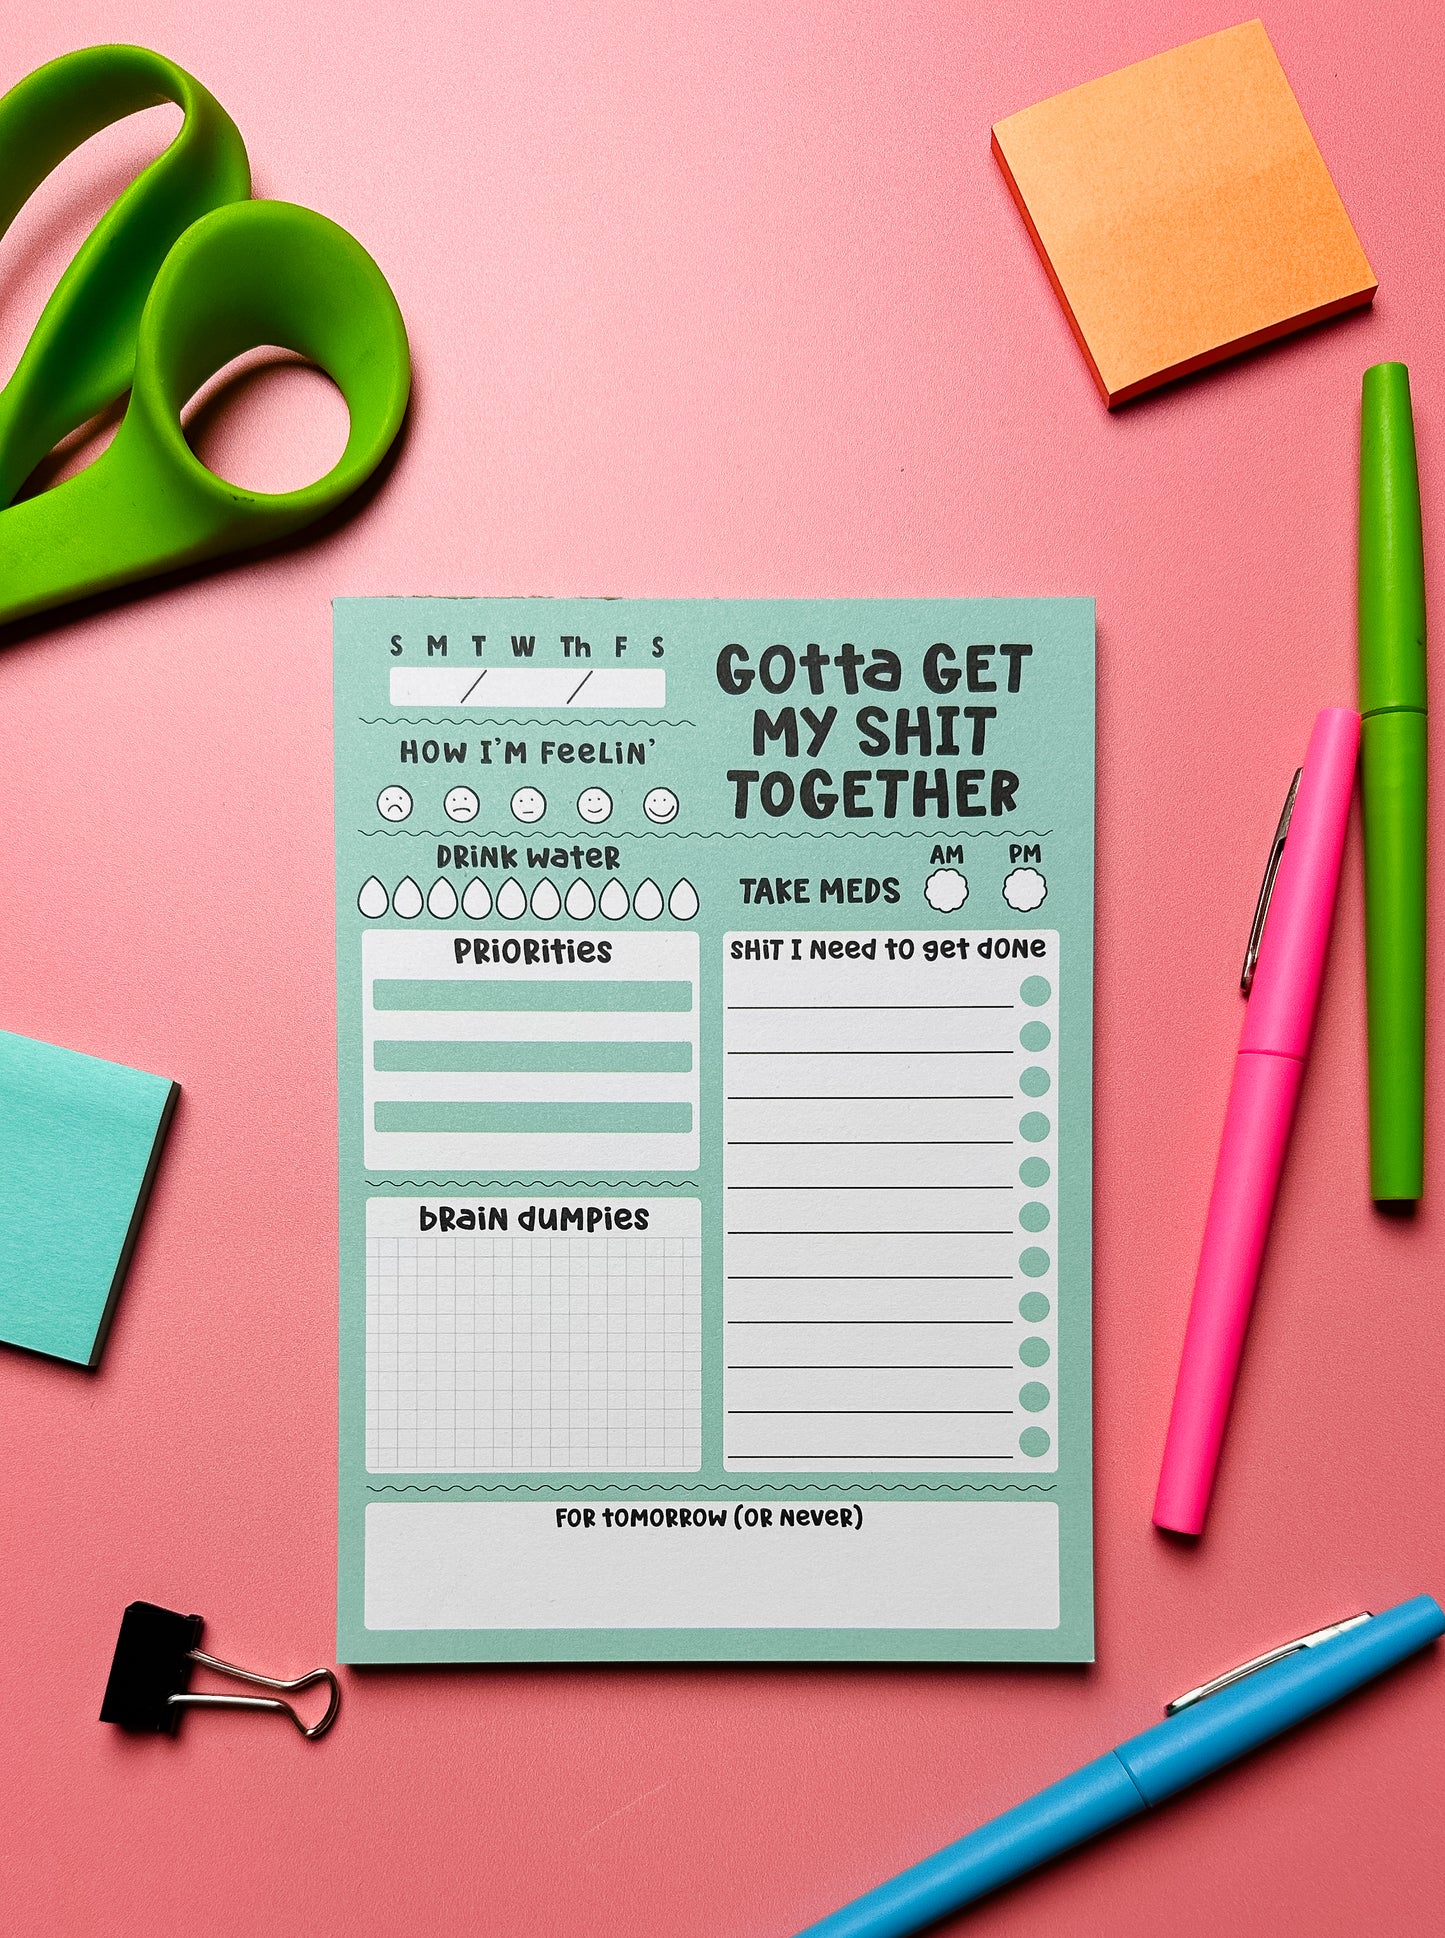 Gotta Get My Shit Together Notepad